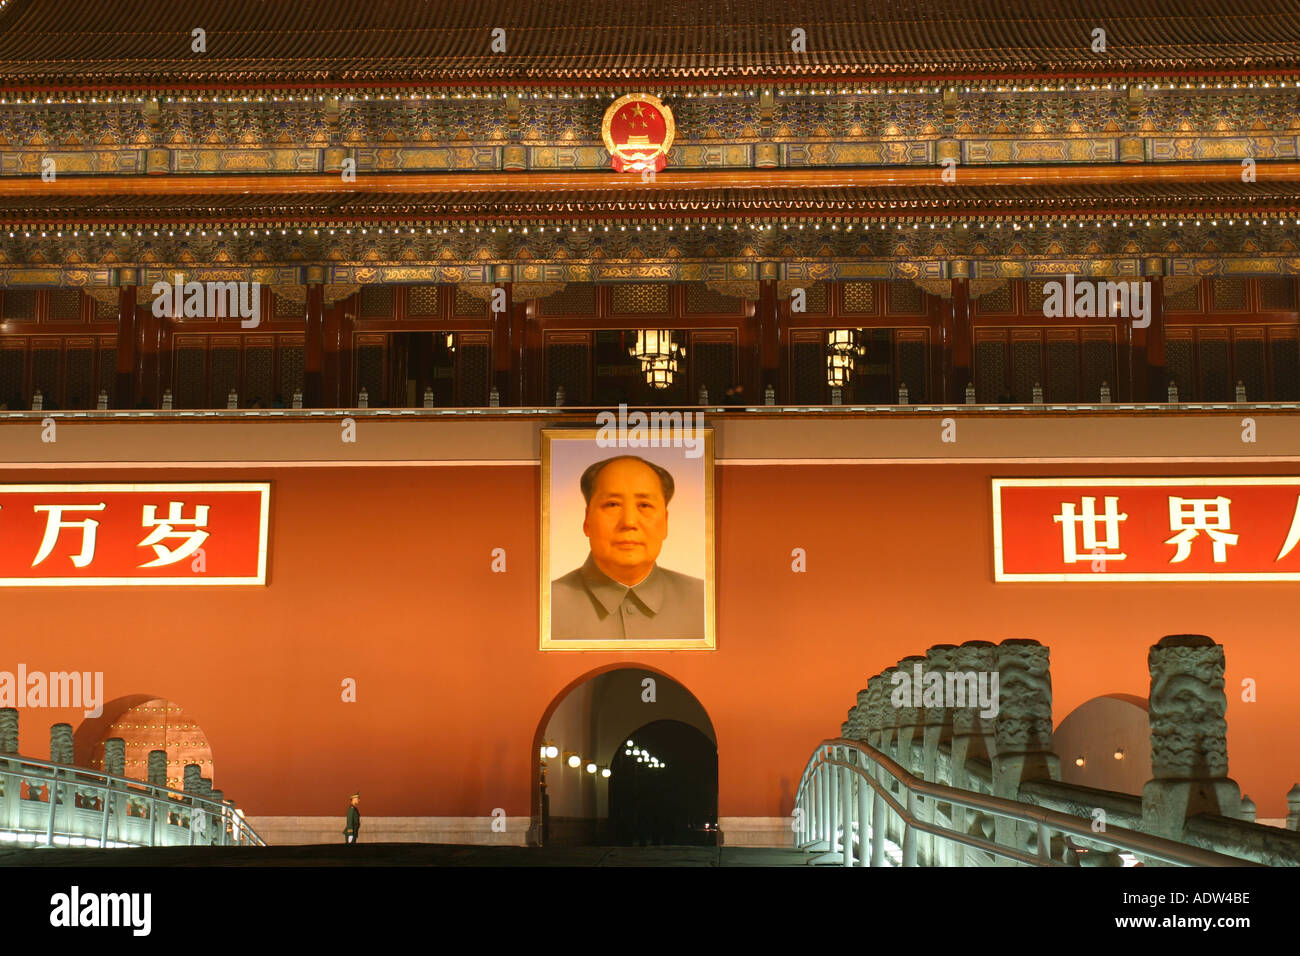 Illuminated night view of the portrait of Mao ZeDong at entrance to Forbidden City Beijing Asia Stock Photo